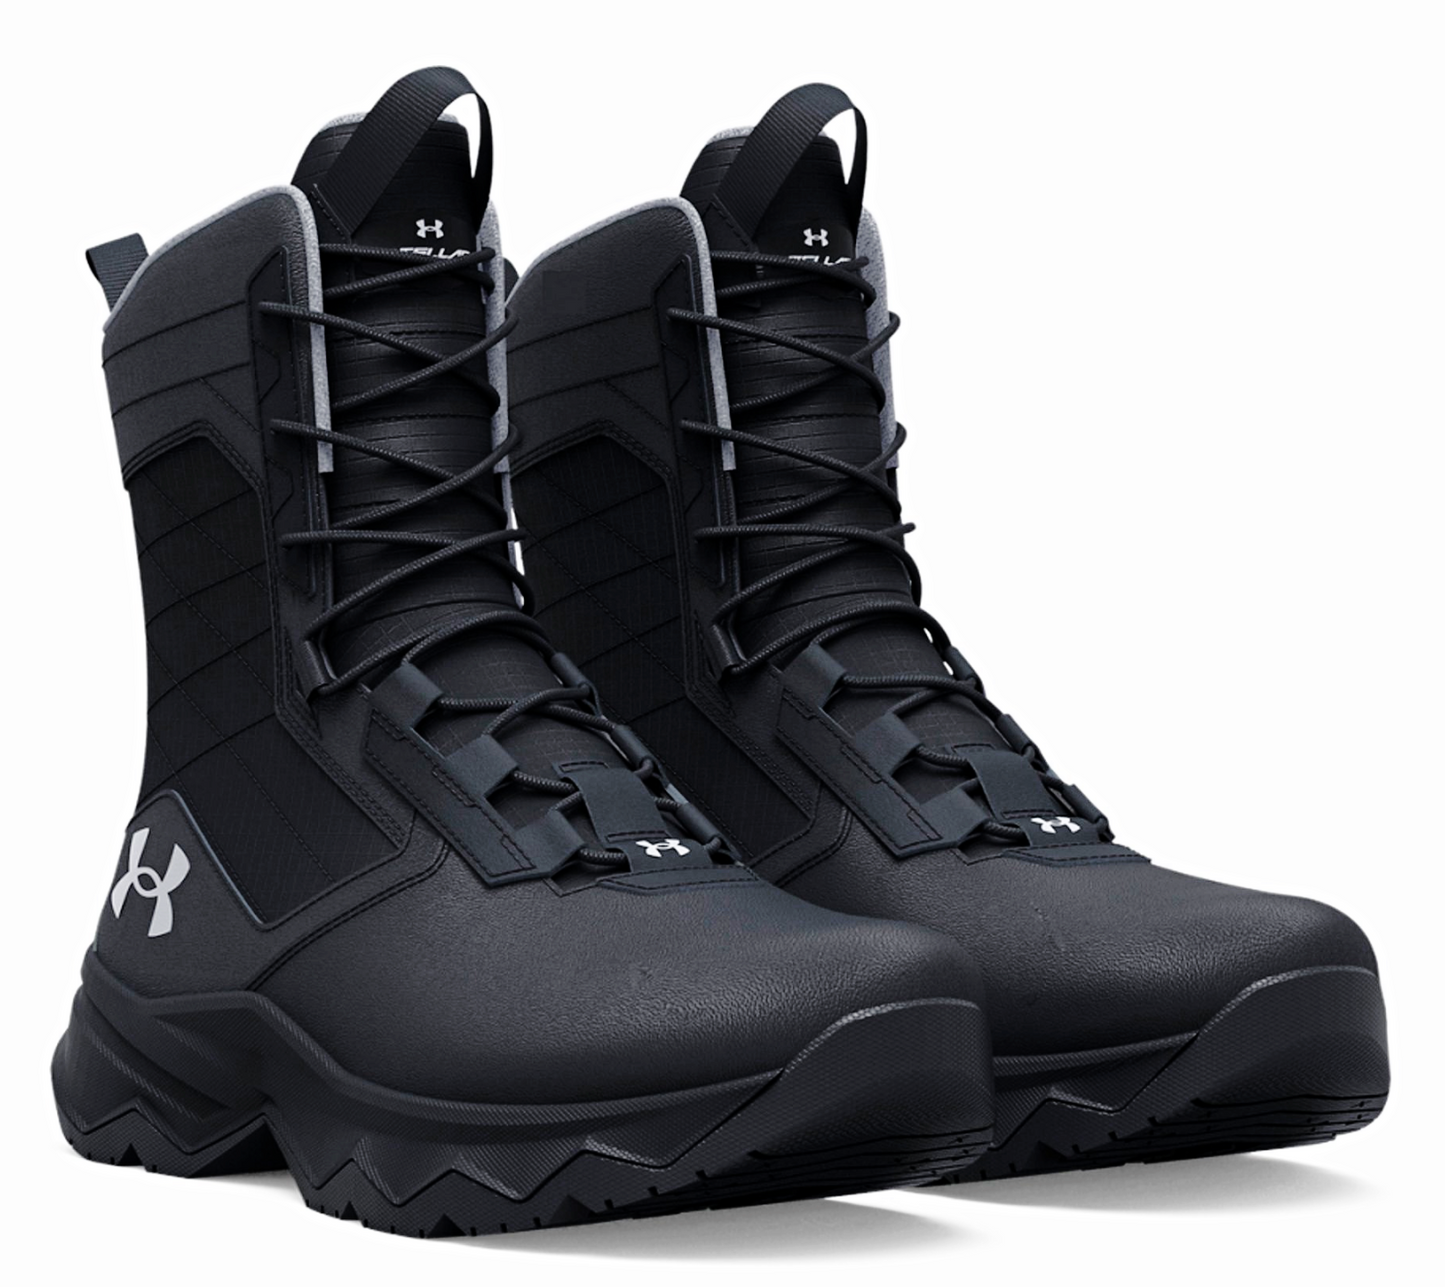 Under Armour Stellar G2 Wide (2E) 8" Black Tactical Boots